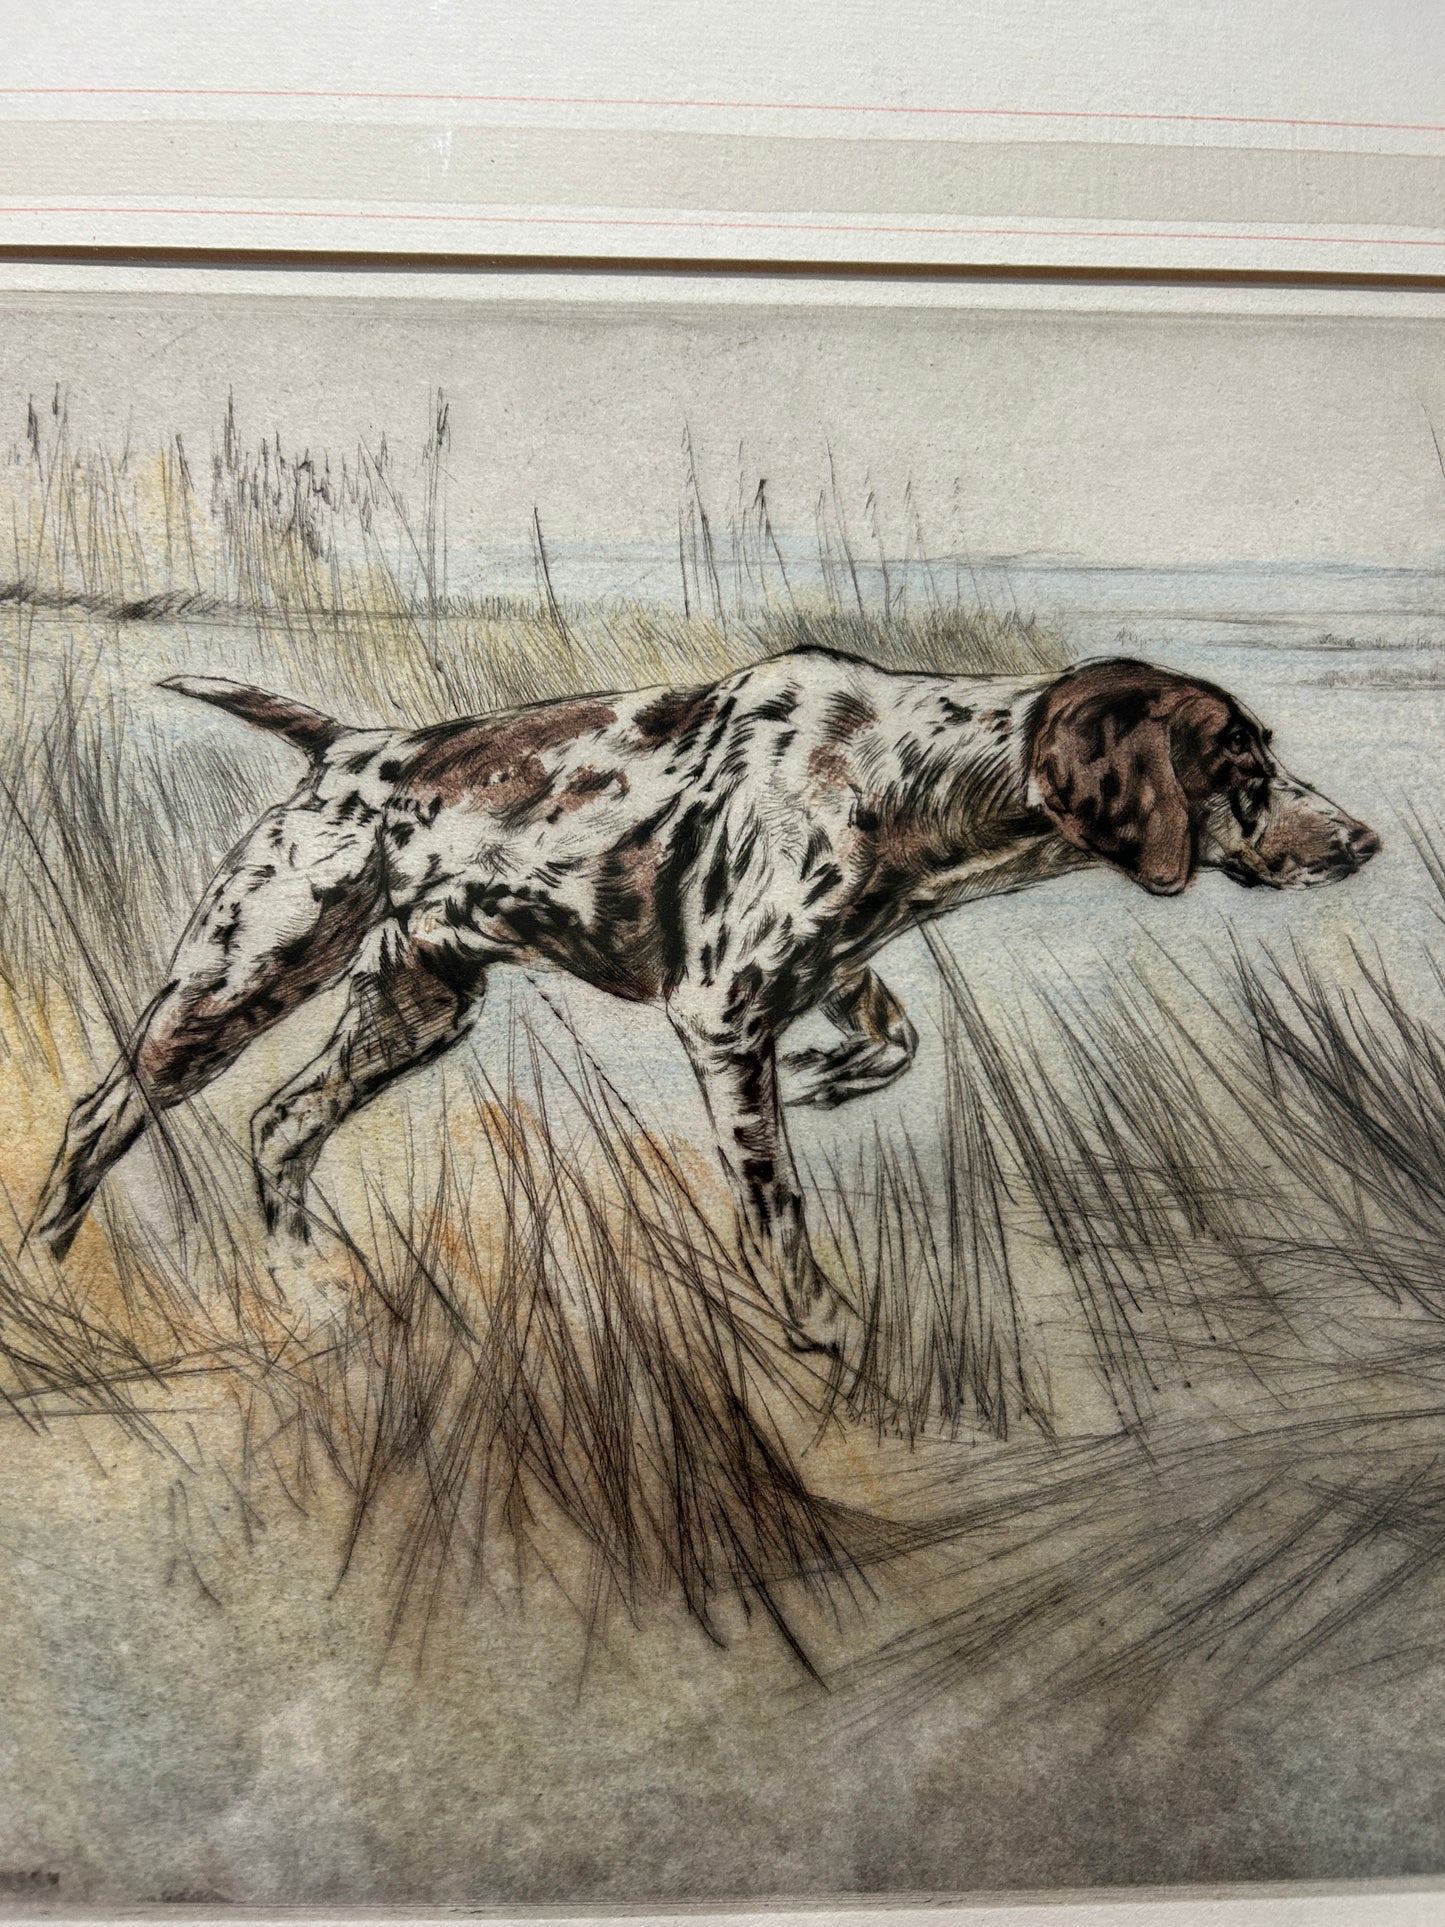 C1960s Signed Ltd edition Etching “Pointer” Gun Dog by Henry Wilkinson 1921 - 2011